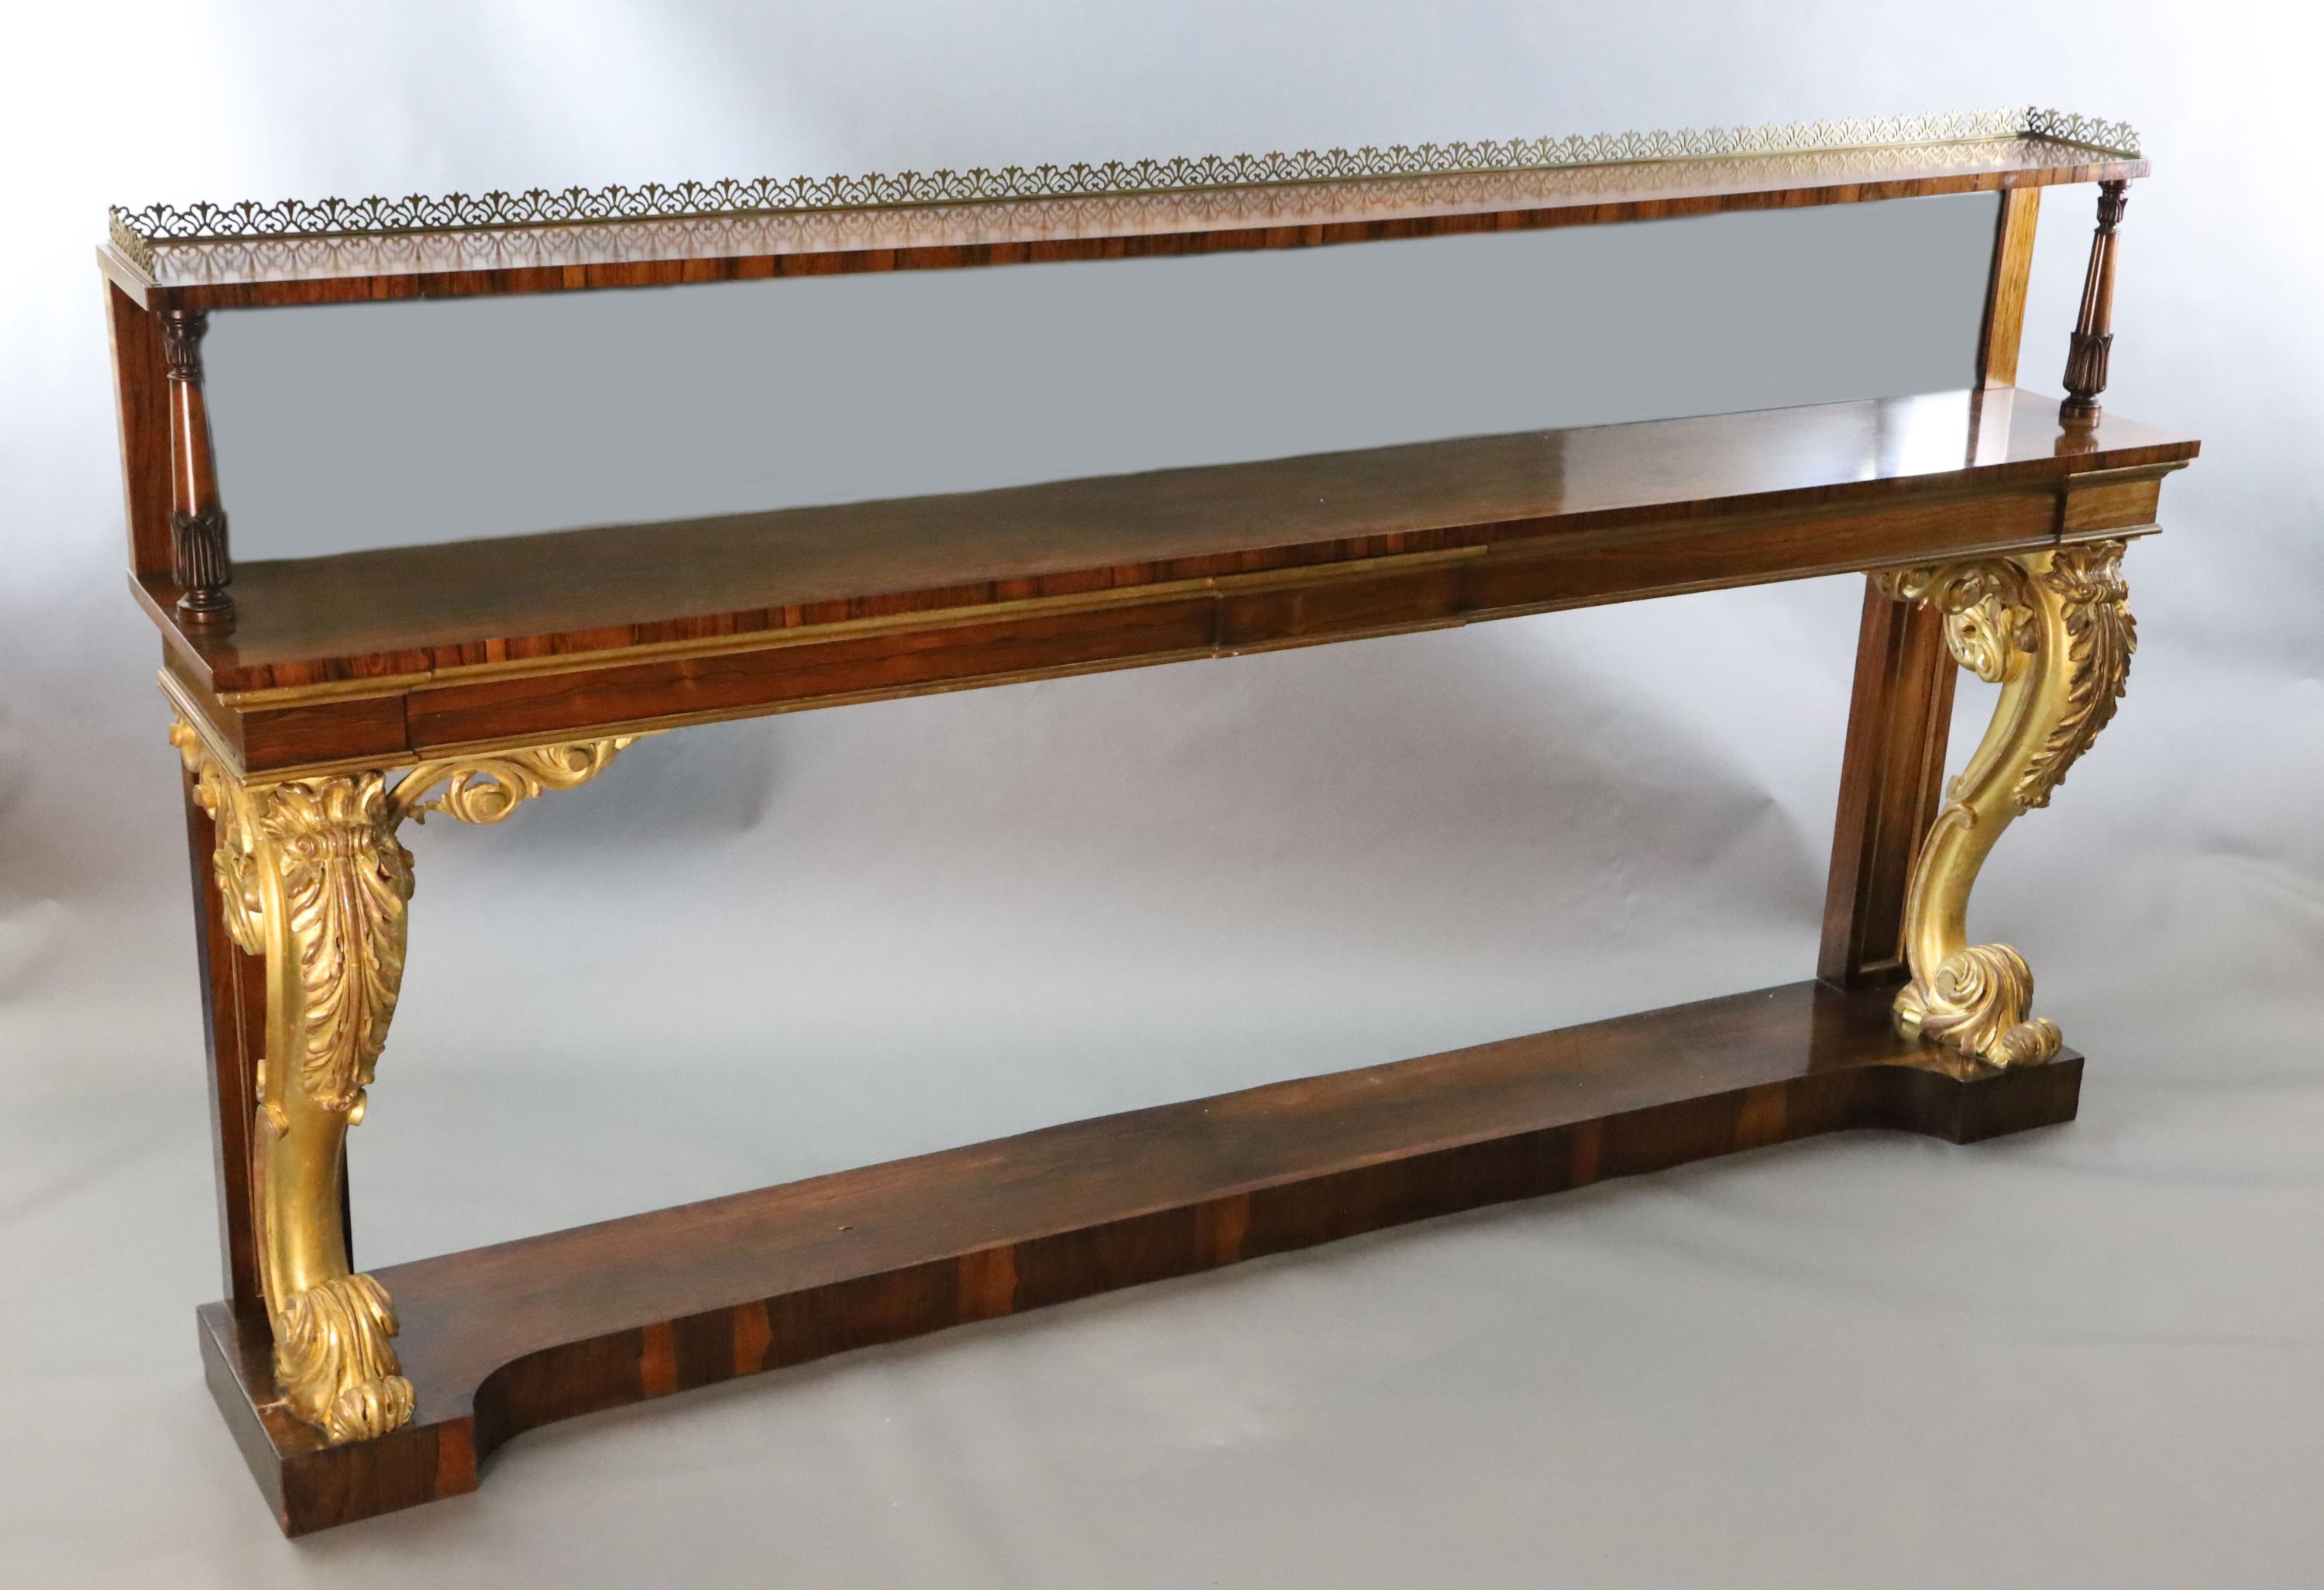 A pair of William IV parcel gilt rosewood console tables, W.8ft 2in. D.1ft 4in. H.4ft 4in.